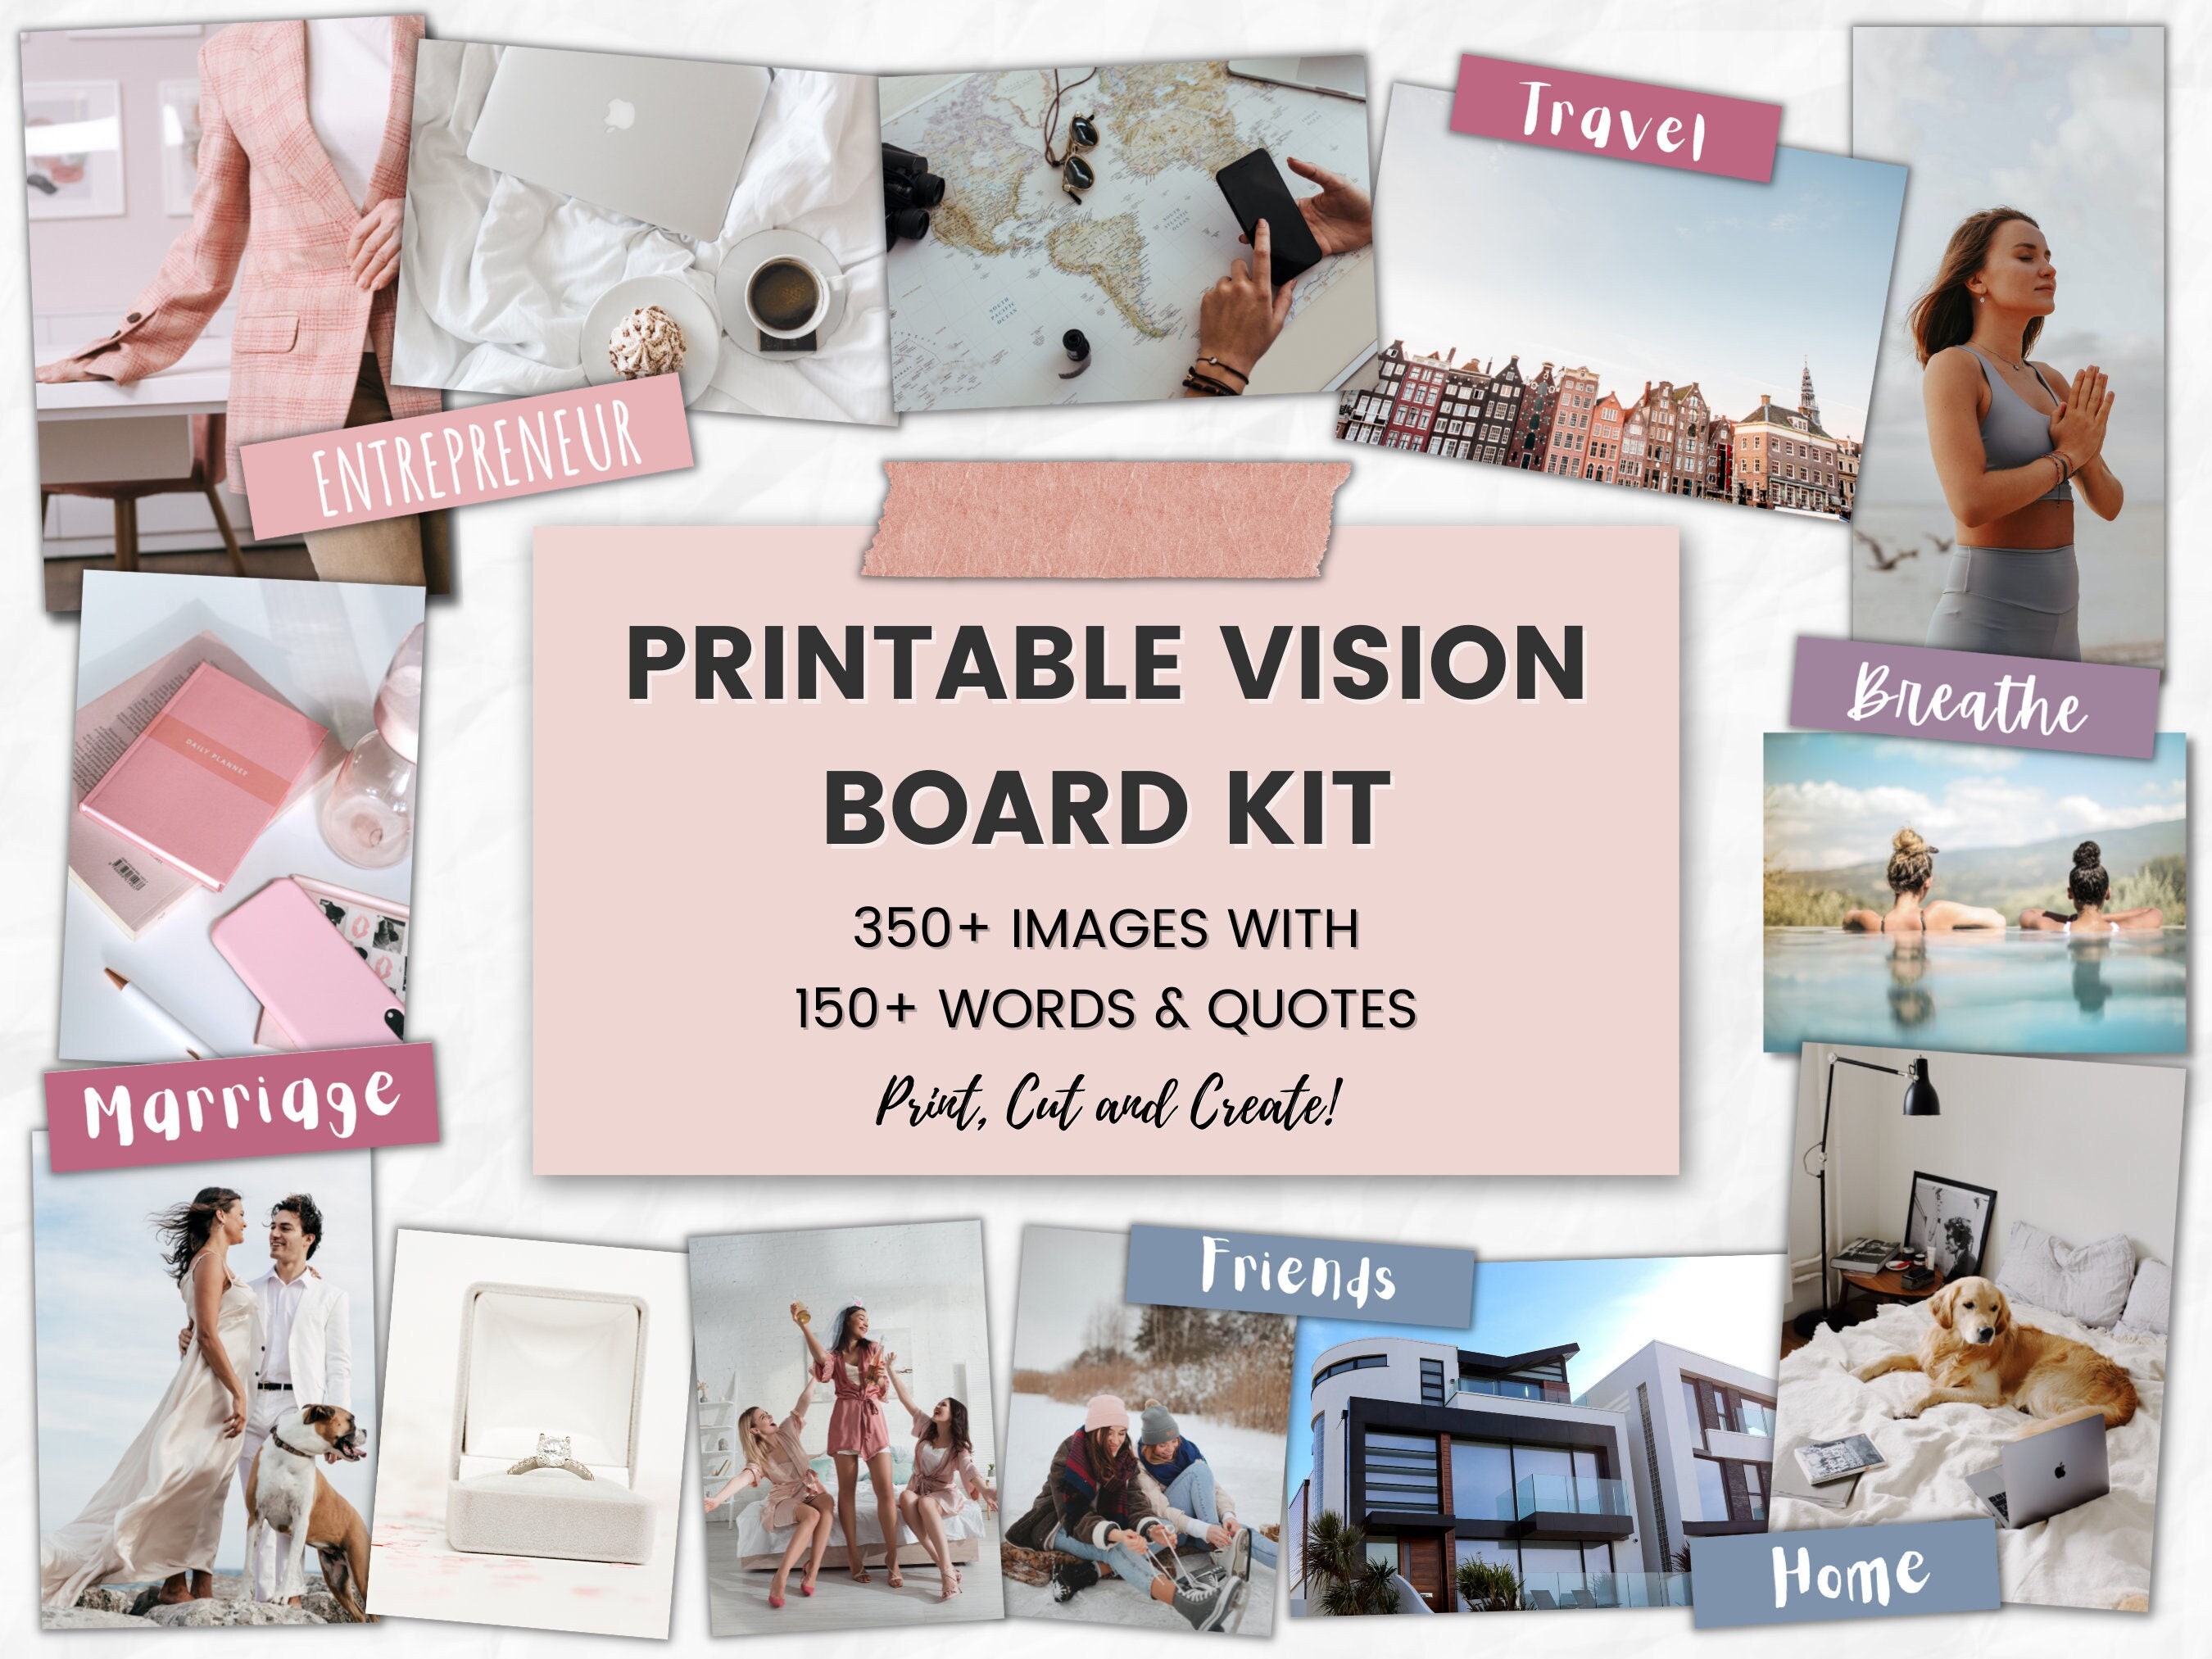  Vision Board Kit - Premade Dream Board with Manifestation  Pictures Supplies, Goal Collage Book for Wall, Complete Mood Boards Kits,  Law of Attraction Journal Planner Affirmation Cards for Women Adults